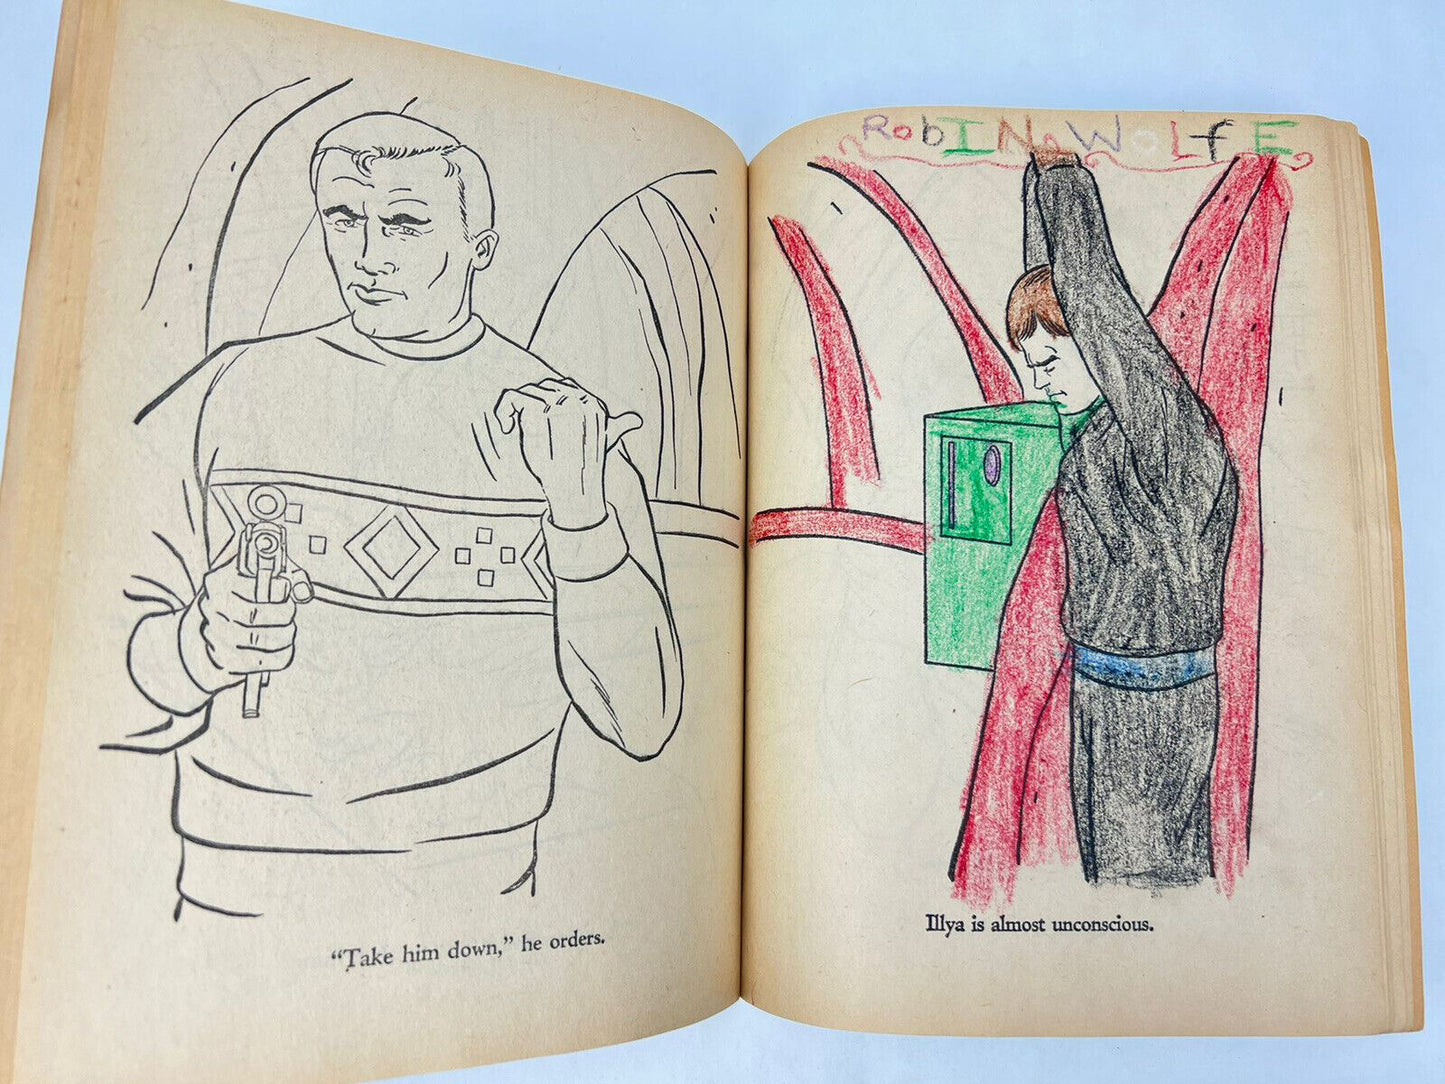 The Man From U.N.C.L.E. Coloring Book 1967 WHITMAN Mostly Uncolored! Vintage